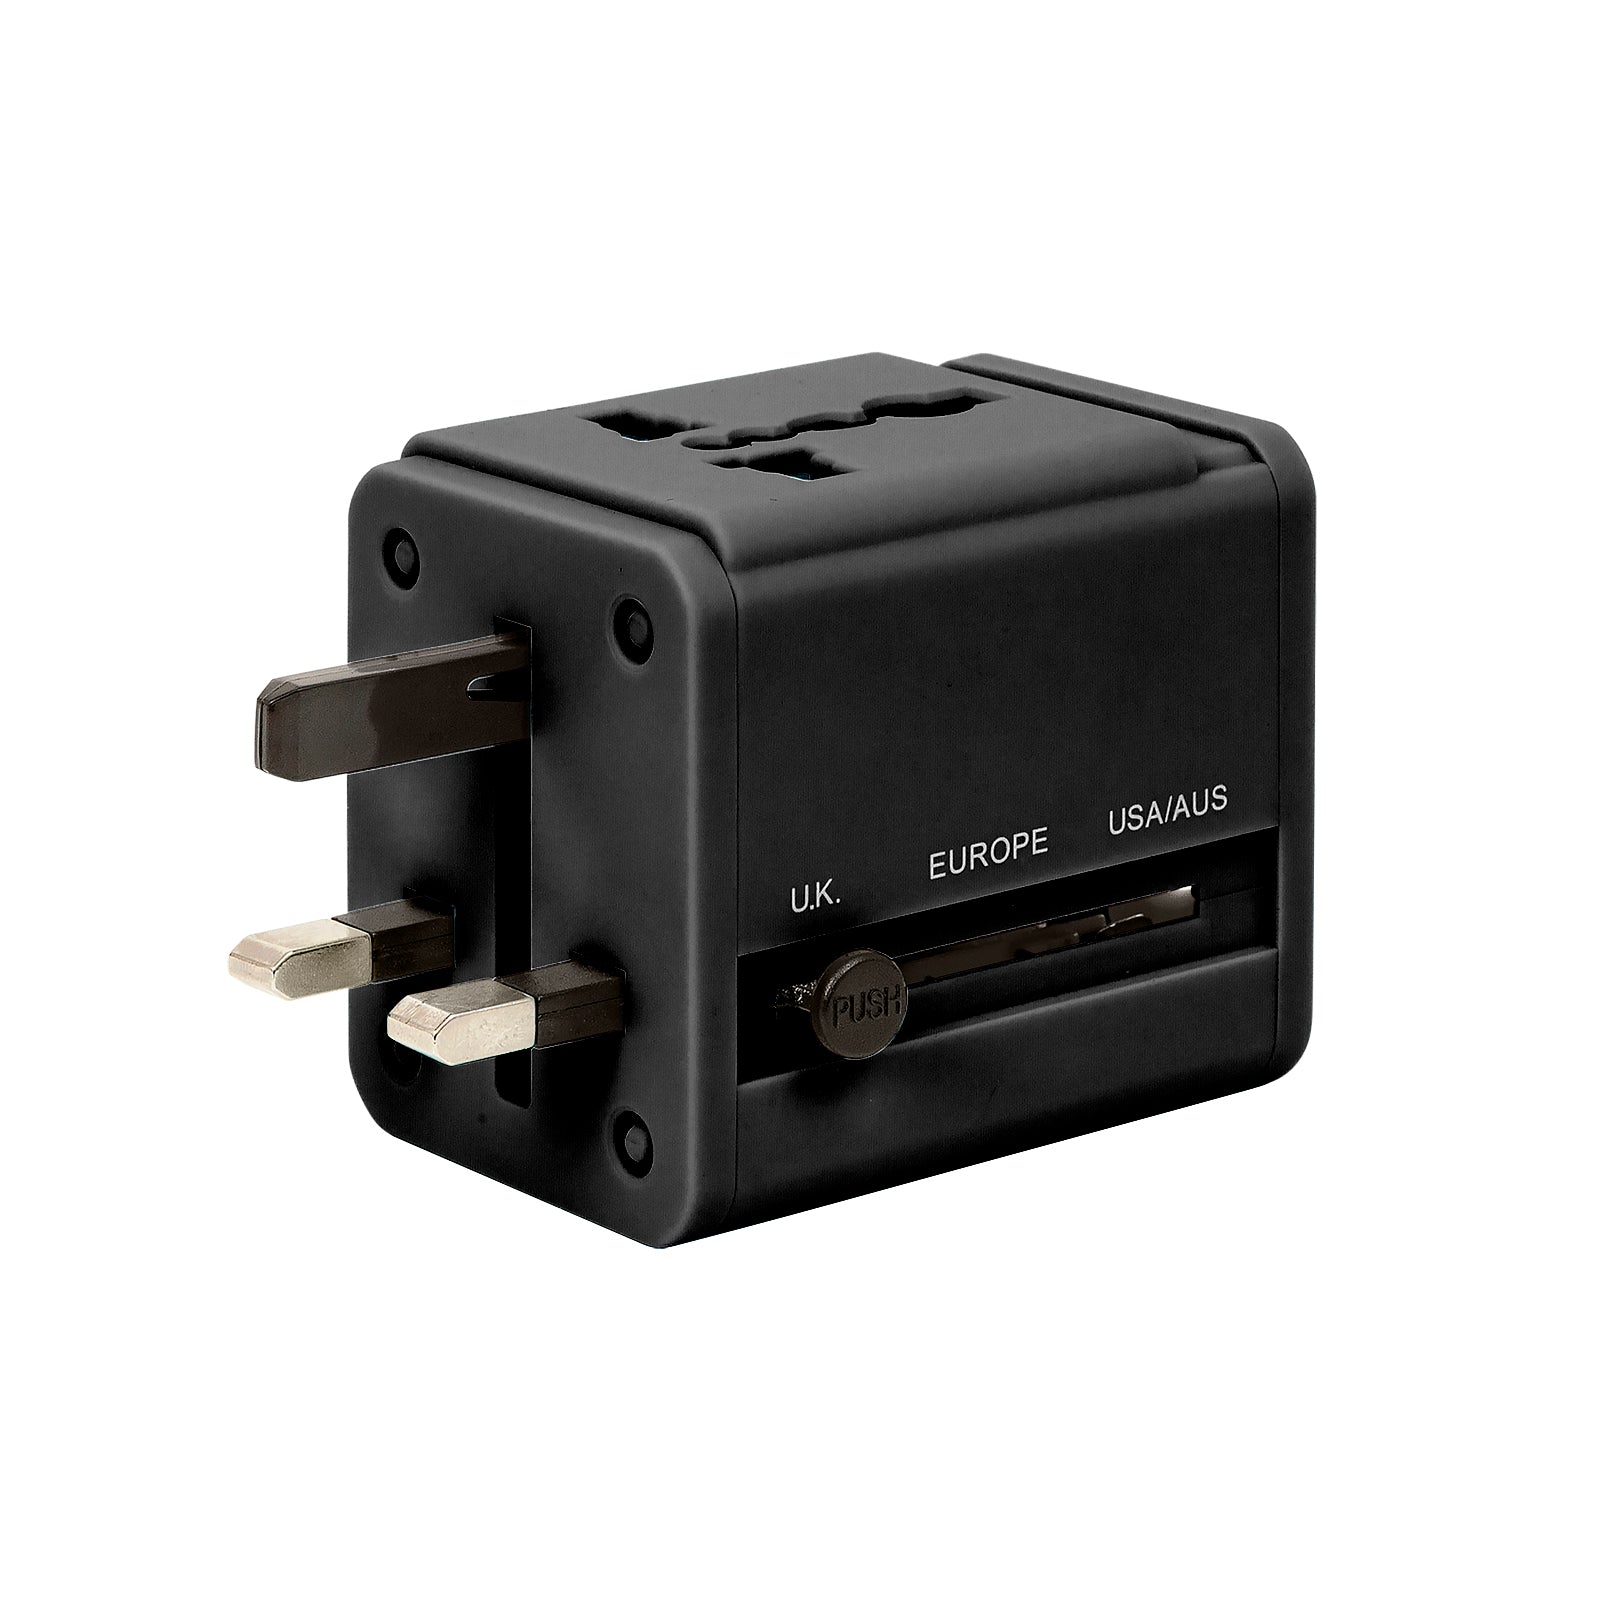 Universal Travel Adapter, Built-in Dual USB Charger